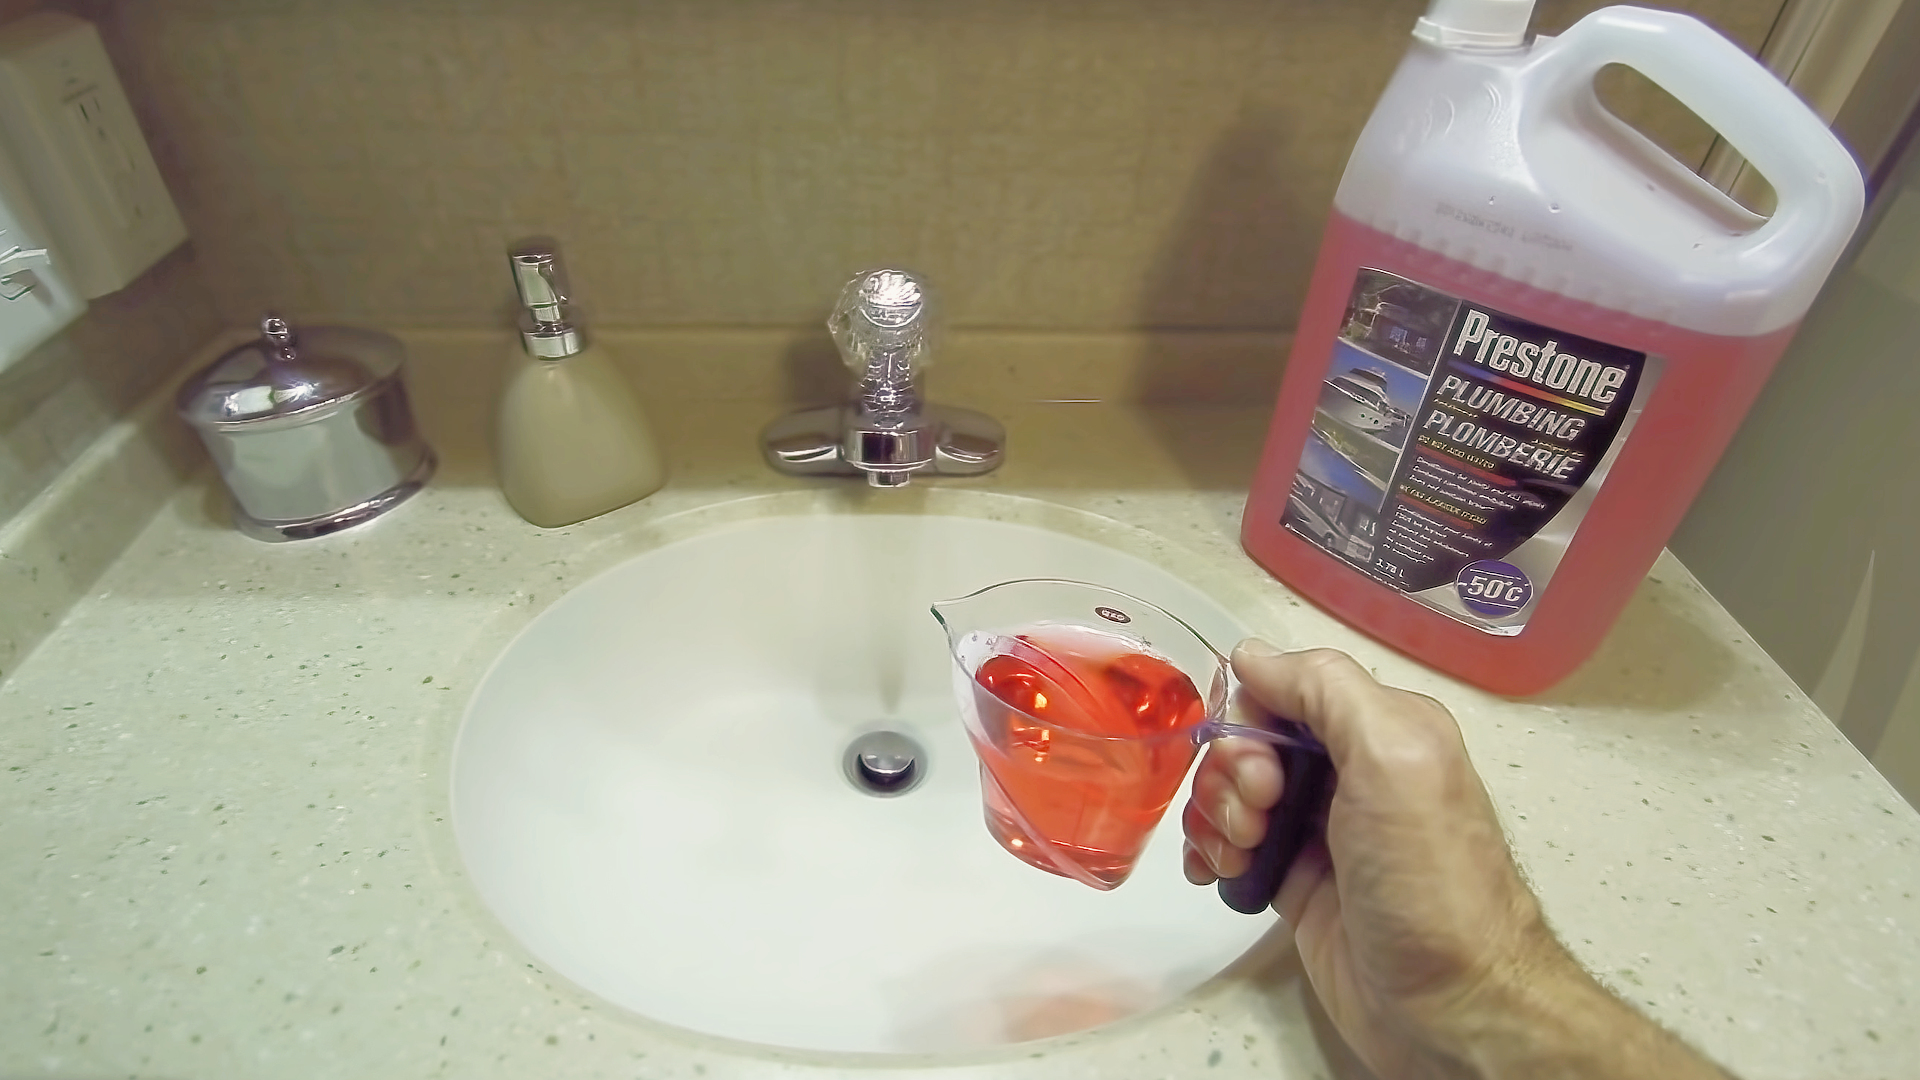 Pouring RV antifreeze down the sink to protect p-trap is an important RV winterizing step